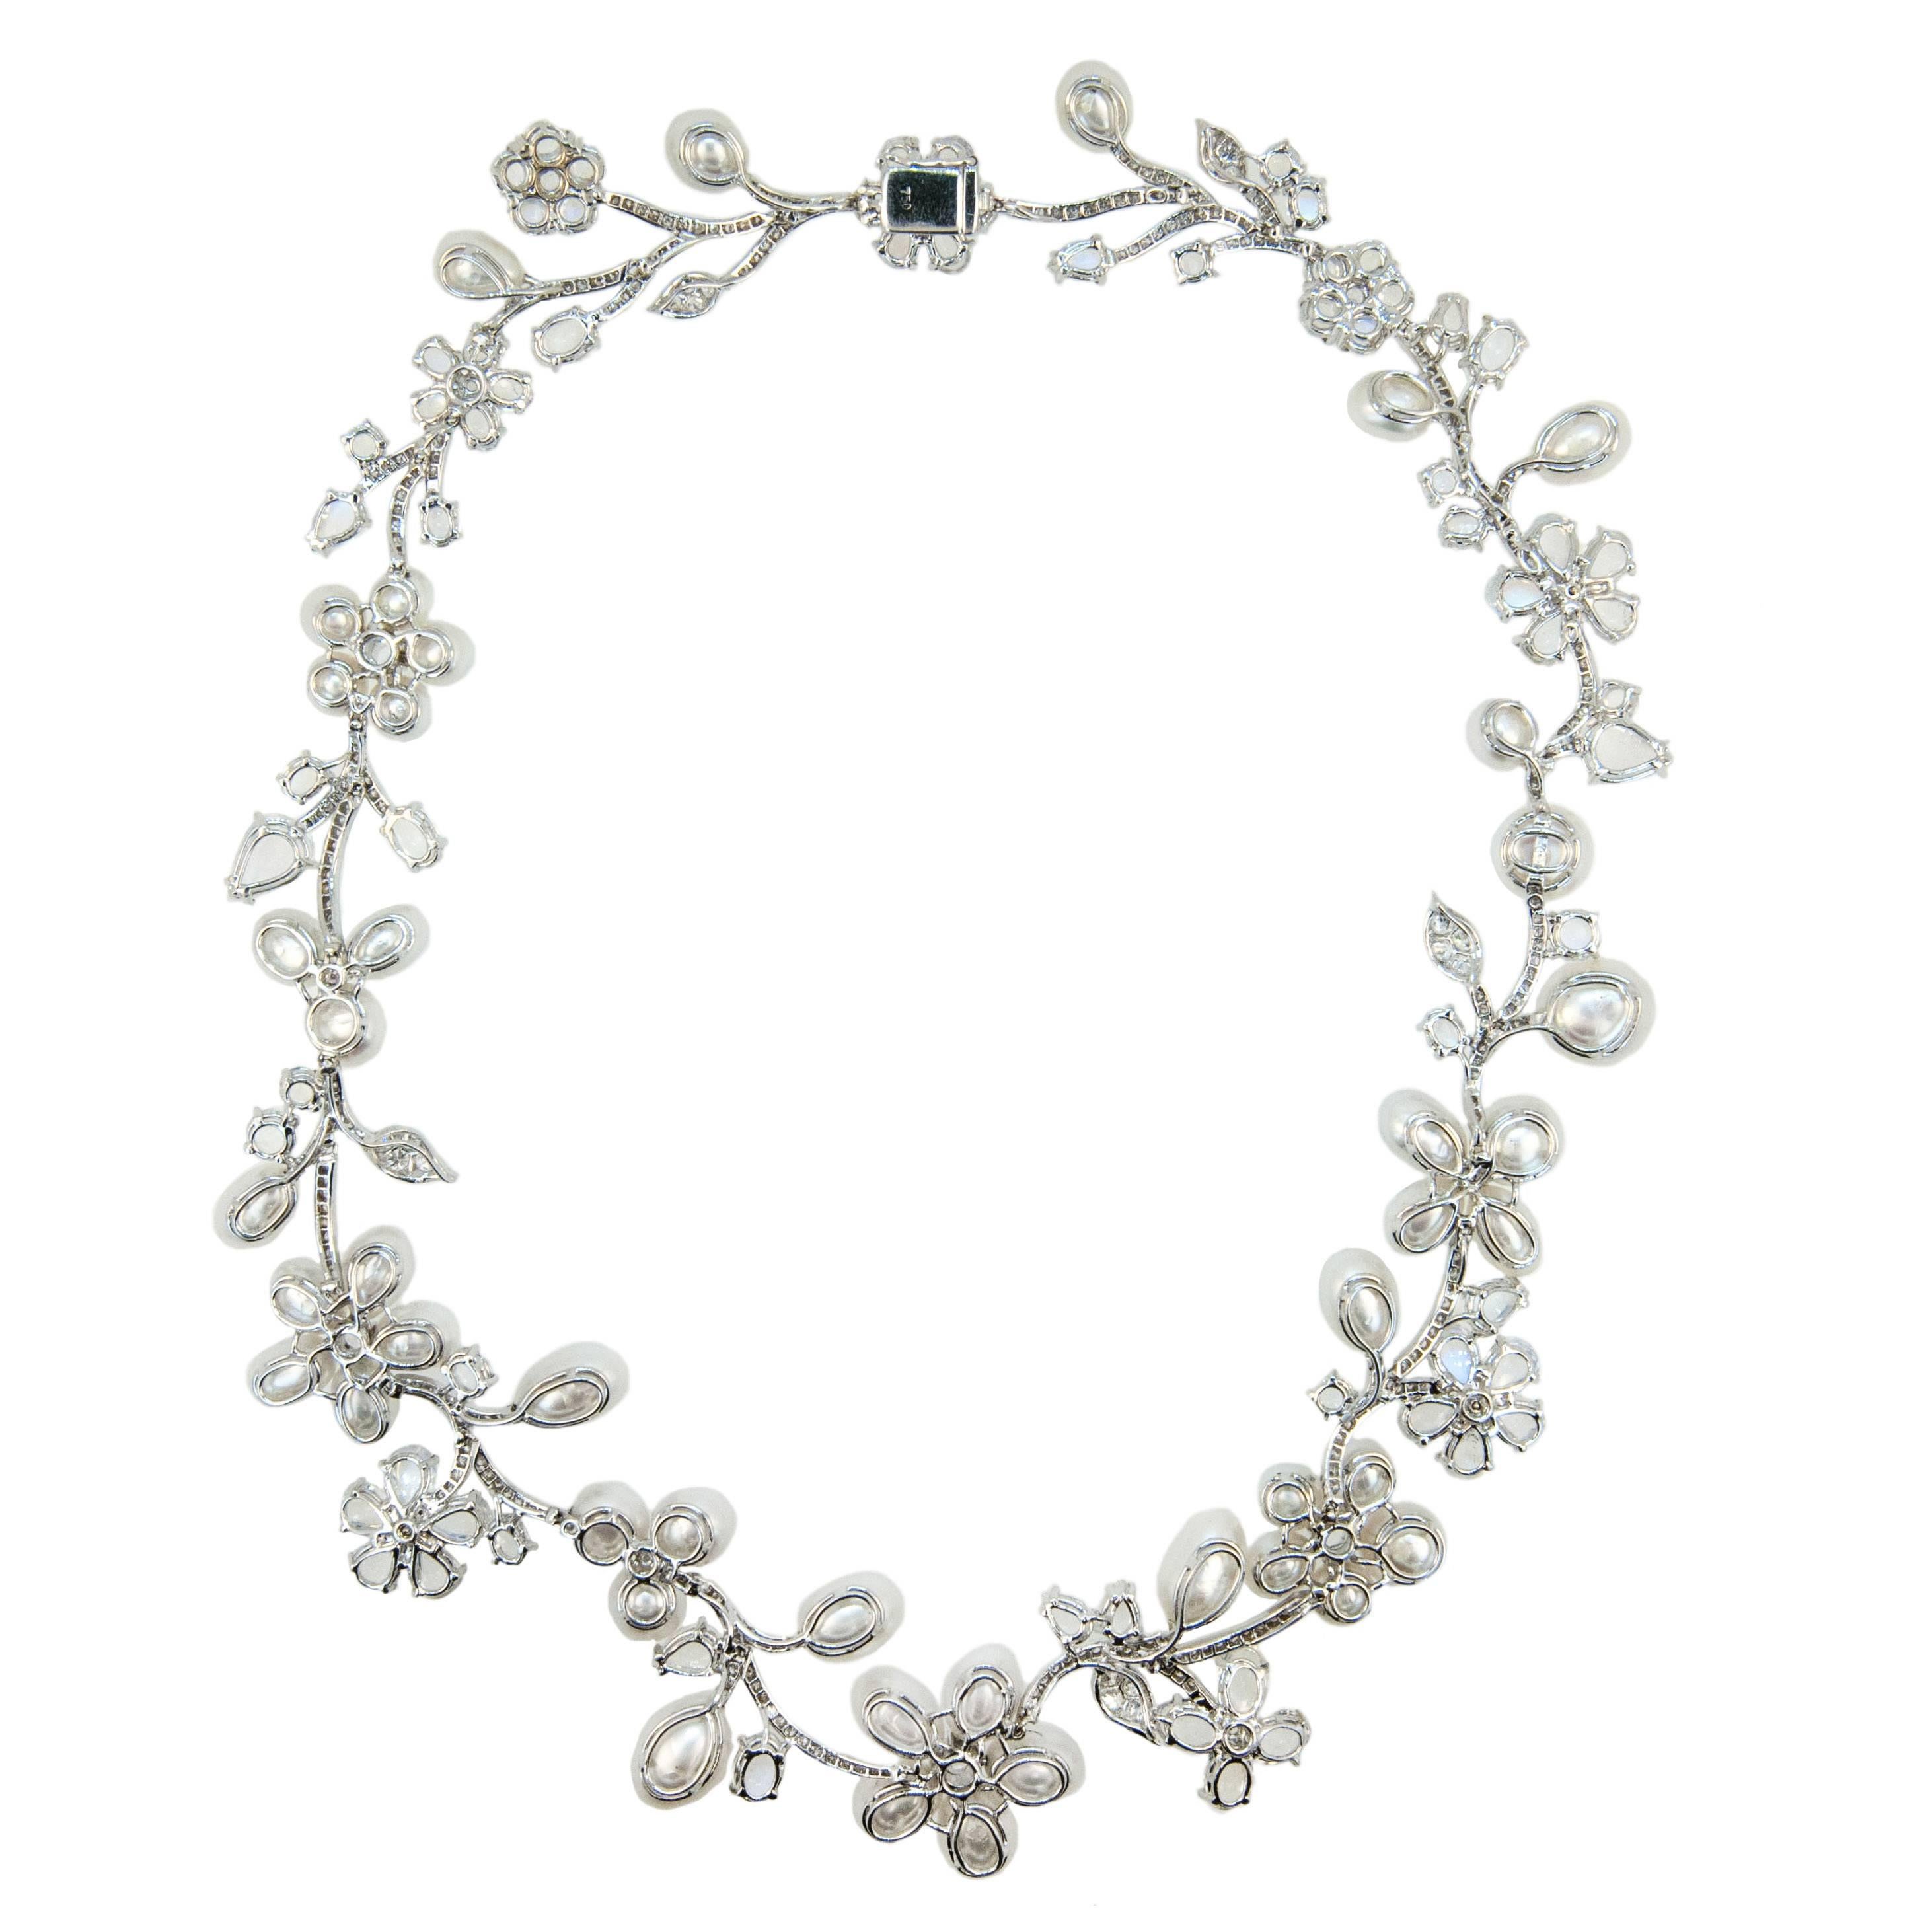 Exquisite Keshi pearl, moonstone and diamond necklace. Contemporary with timeless elegance. 18 karat white gold necklace floral motif set with 44 Keshi Pearls 27.53 total weight. 69 pear, round and oval Moonstones 35.82 carats total weight. Eight